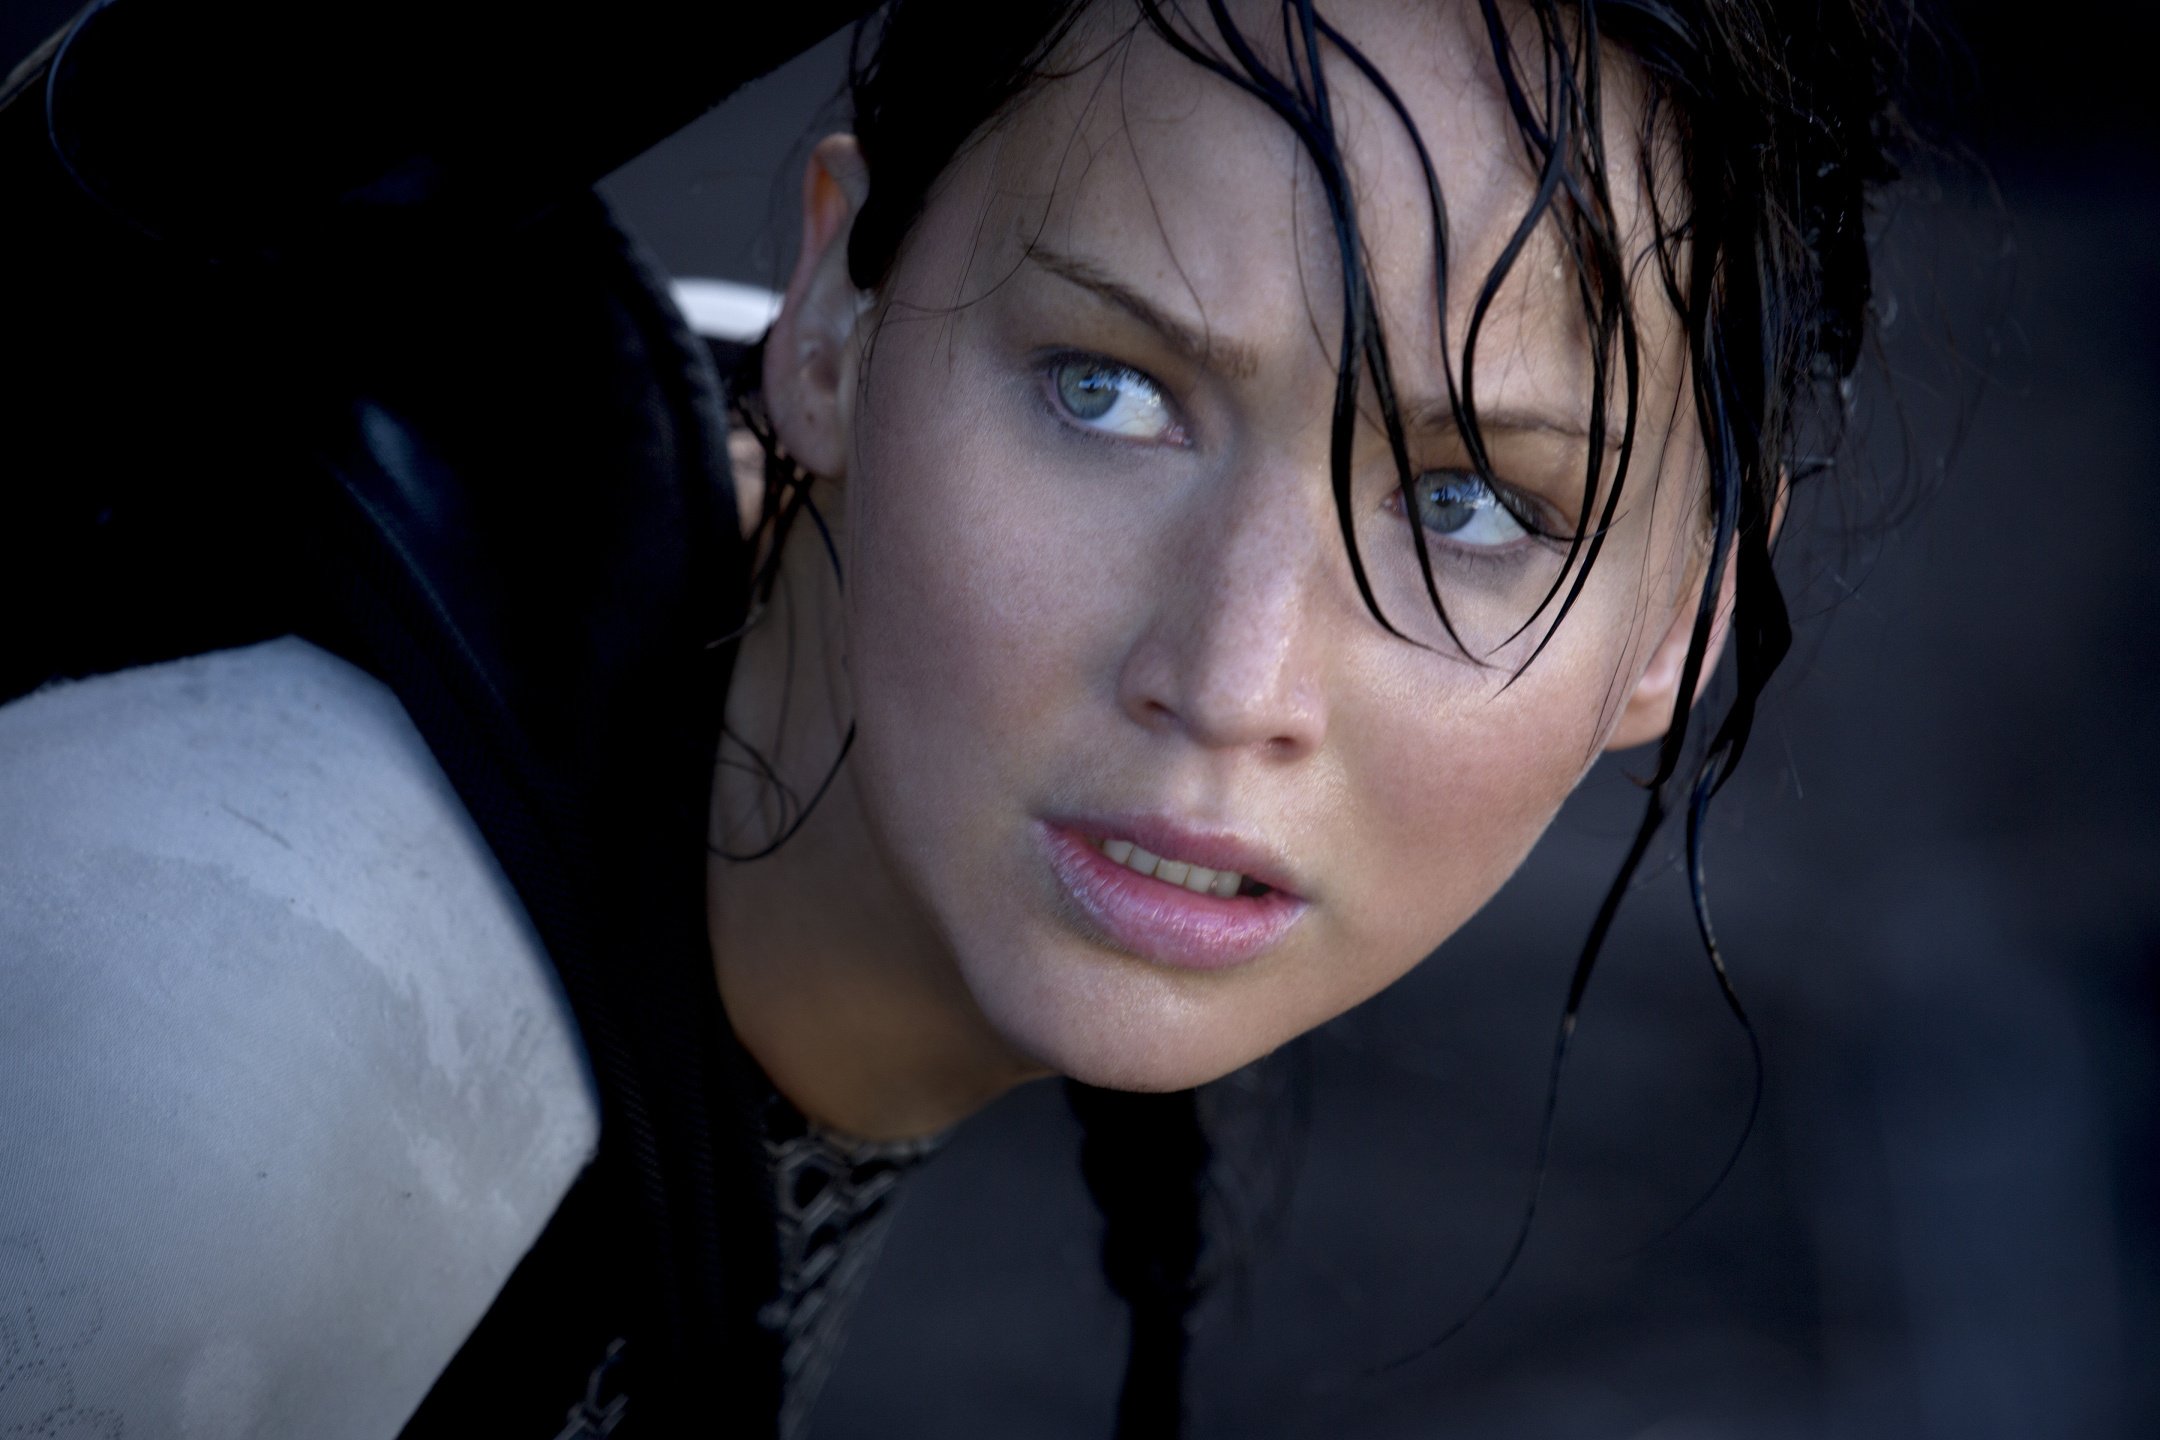 Jennifer Lawrence in a scene from The Hunger Games. Photo: SCMP Pictures